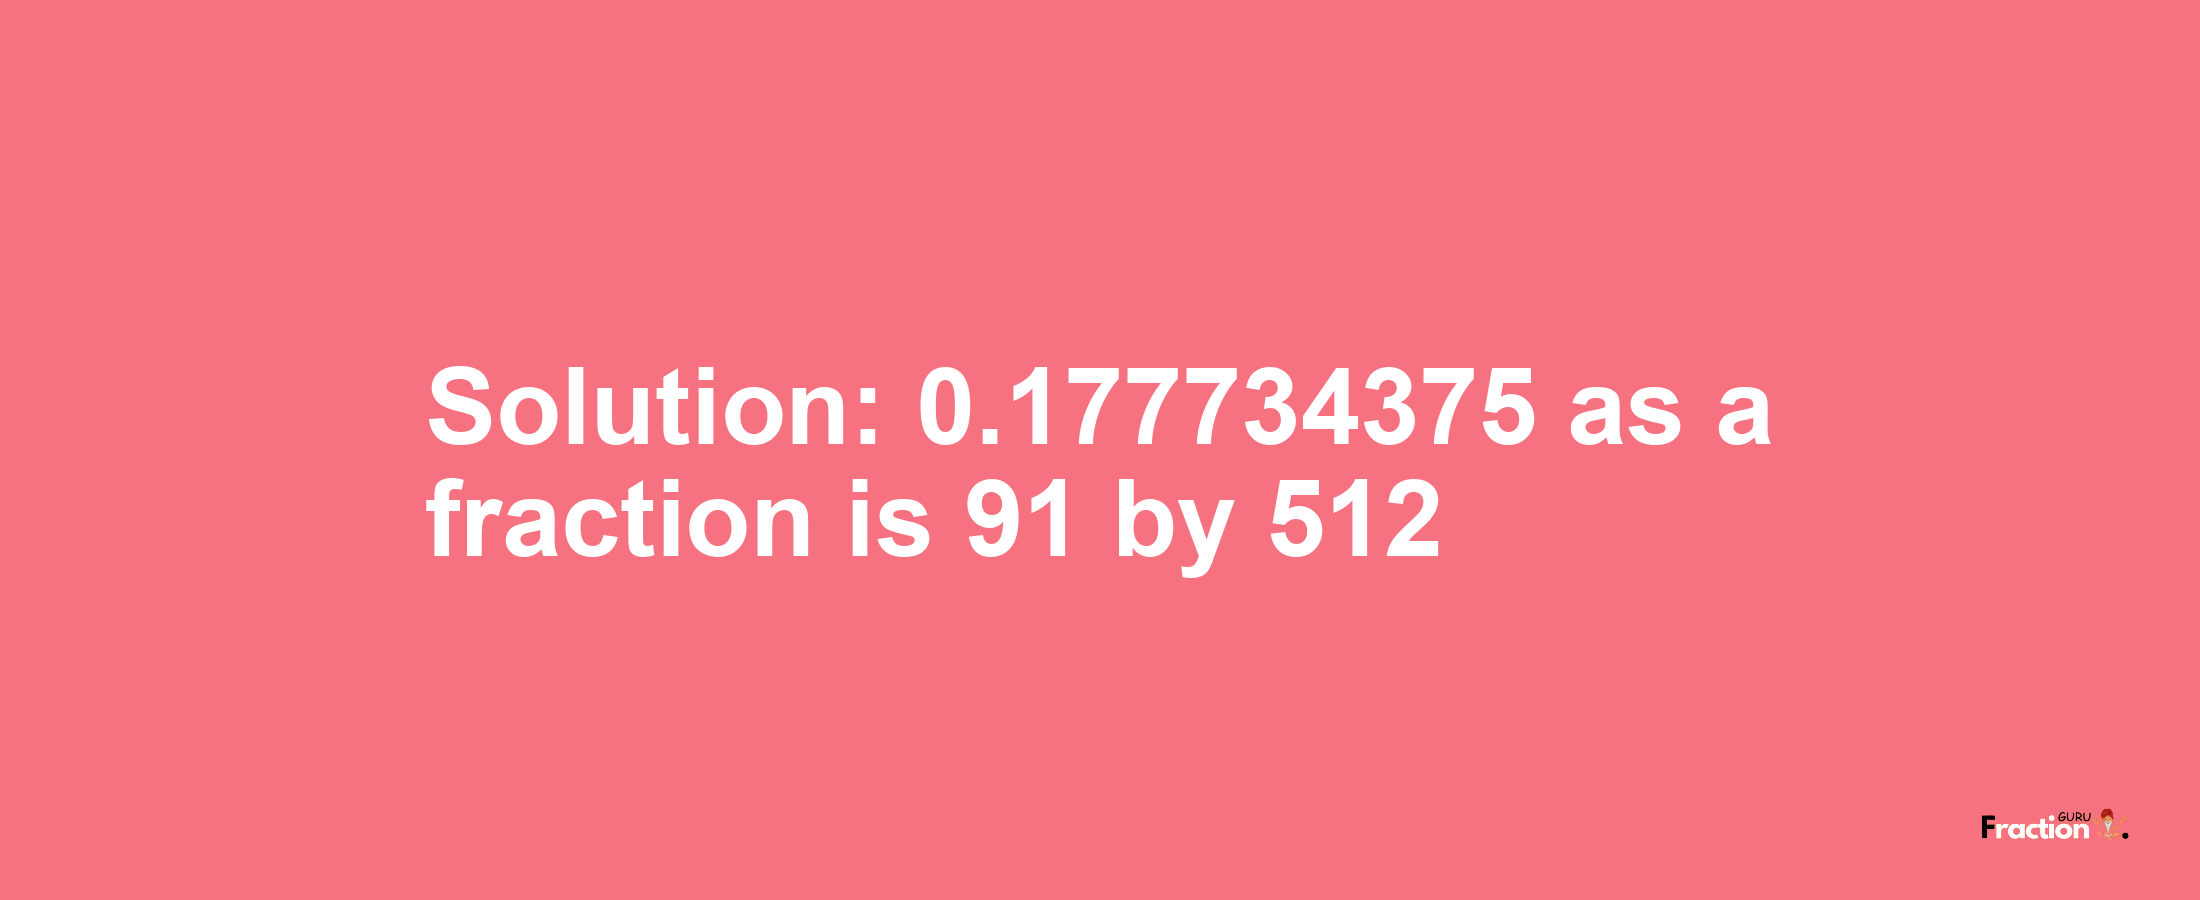 Solution:0.177734375 as a fraction is 91/512